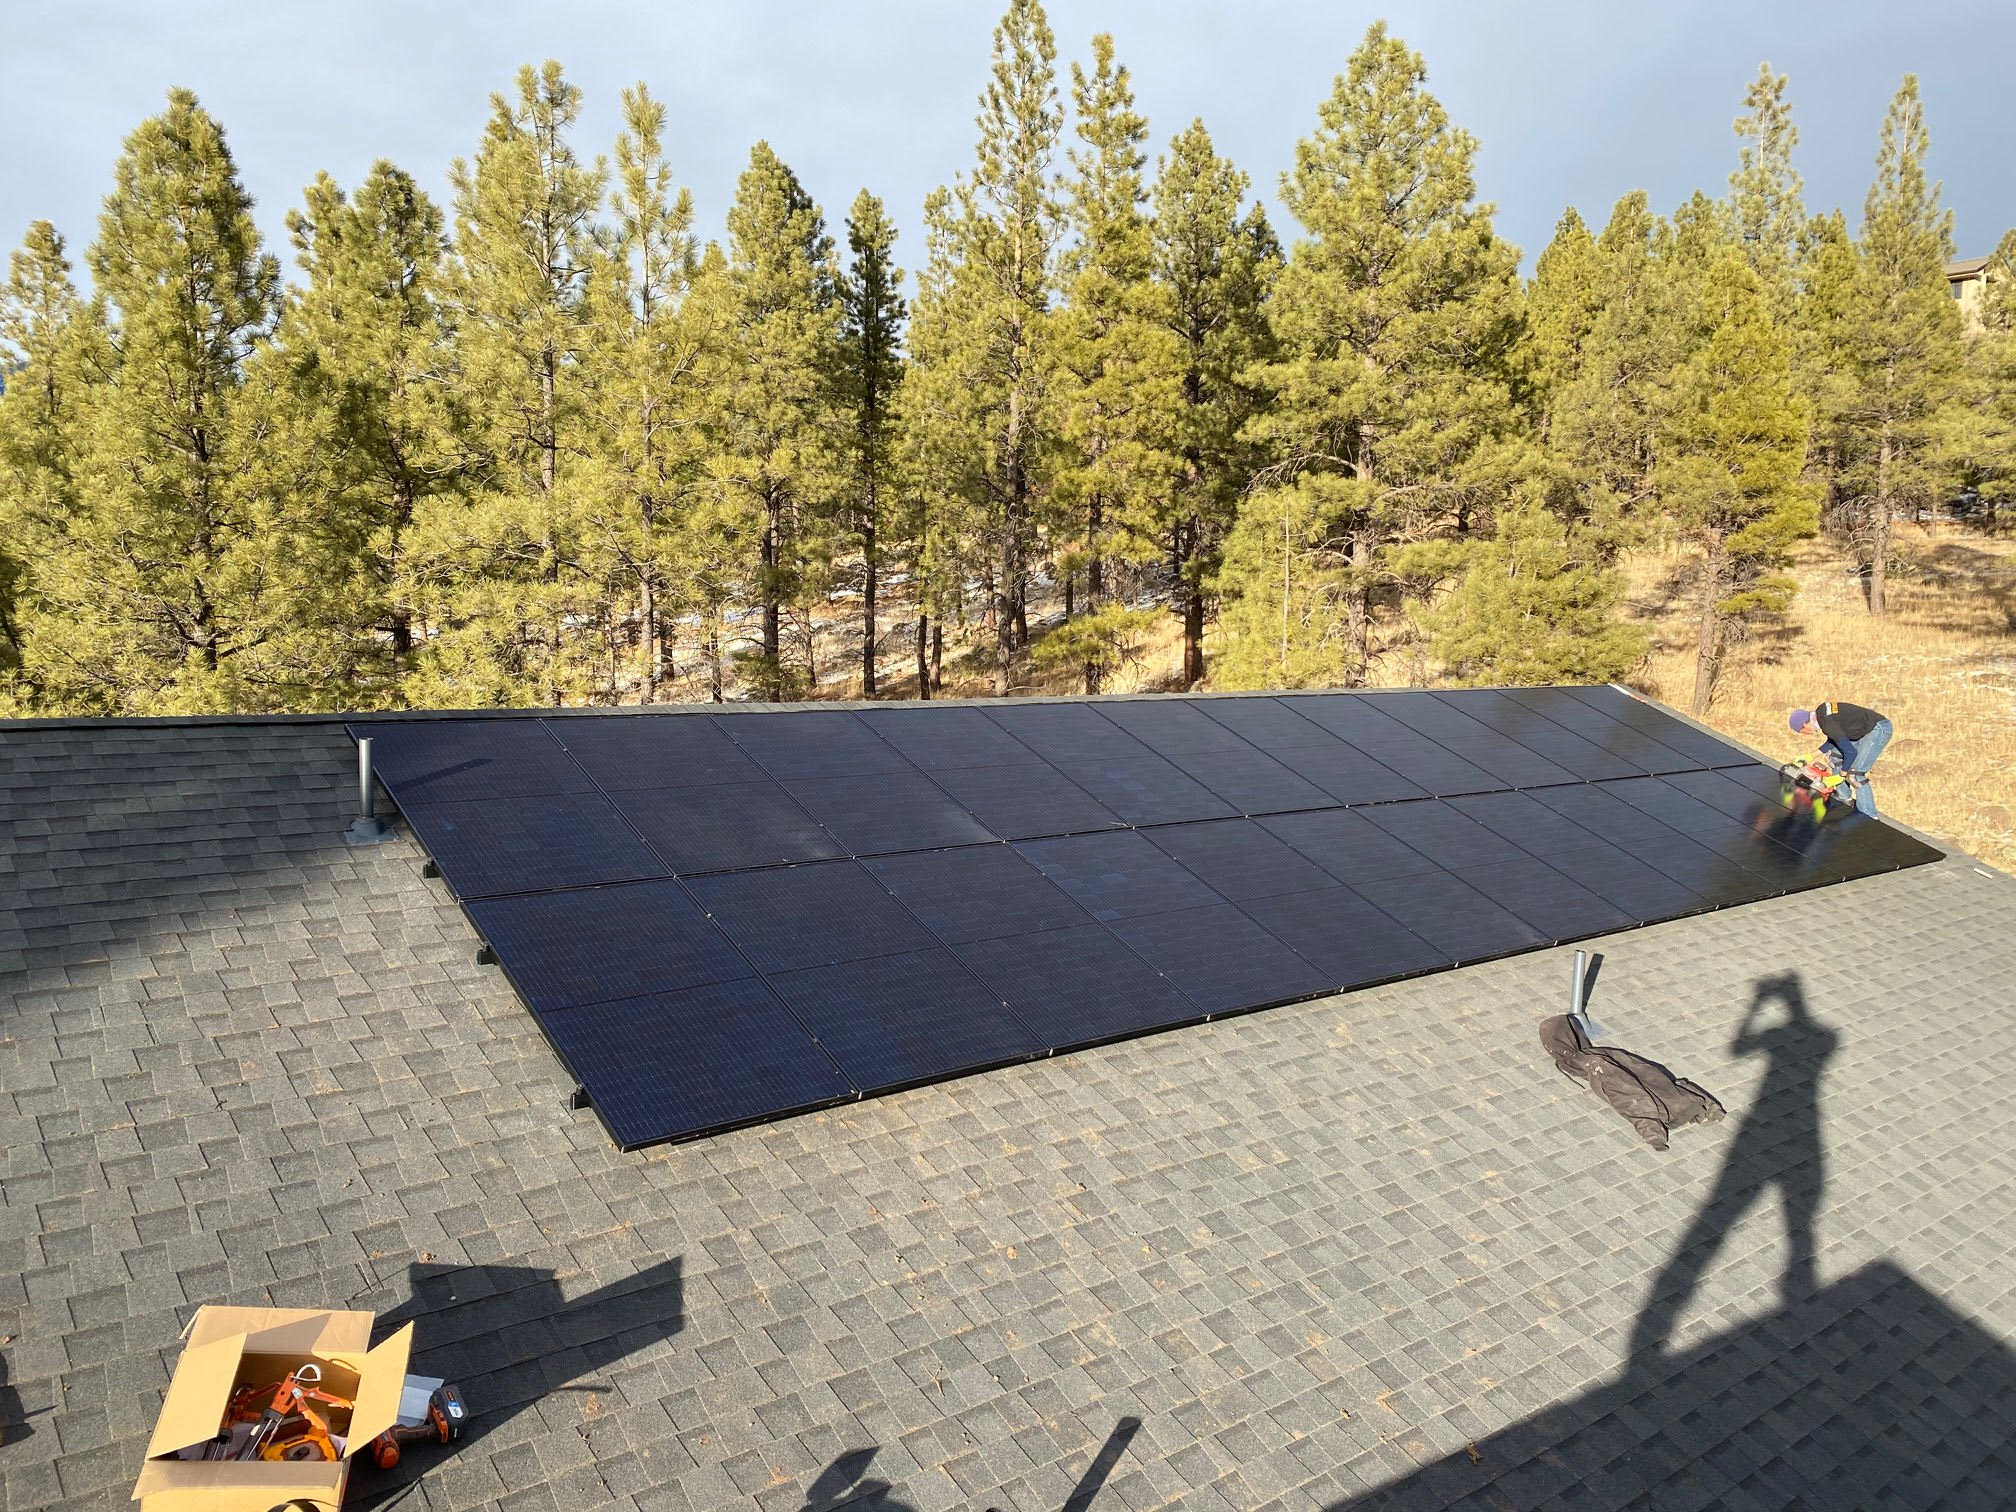 7.92 kW system in Flagstaff, Arizona featuring Hanwha QCell 330-watt panels with Enphase iQ7+ inverter.